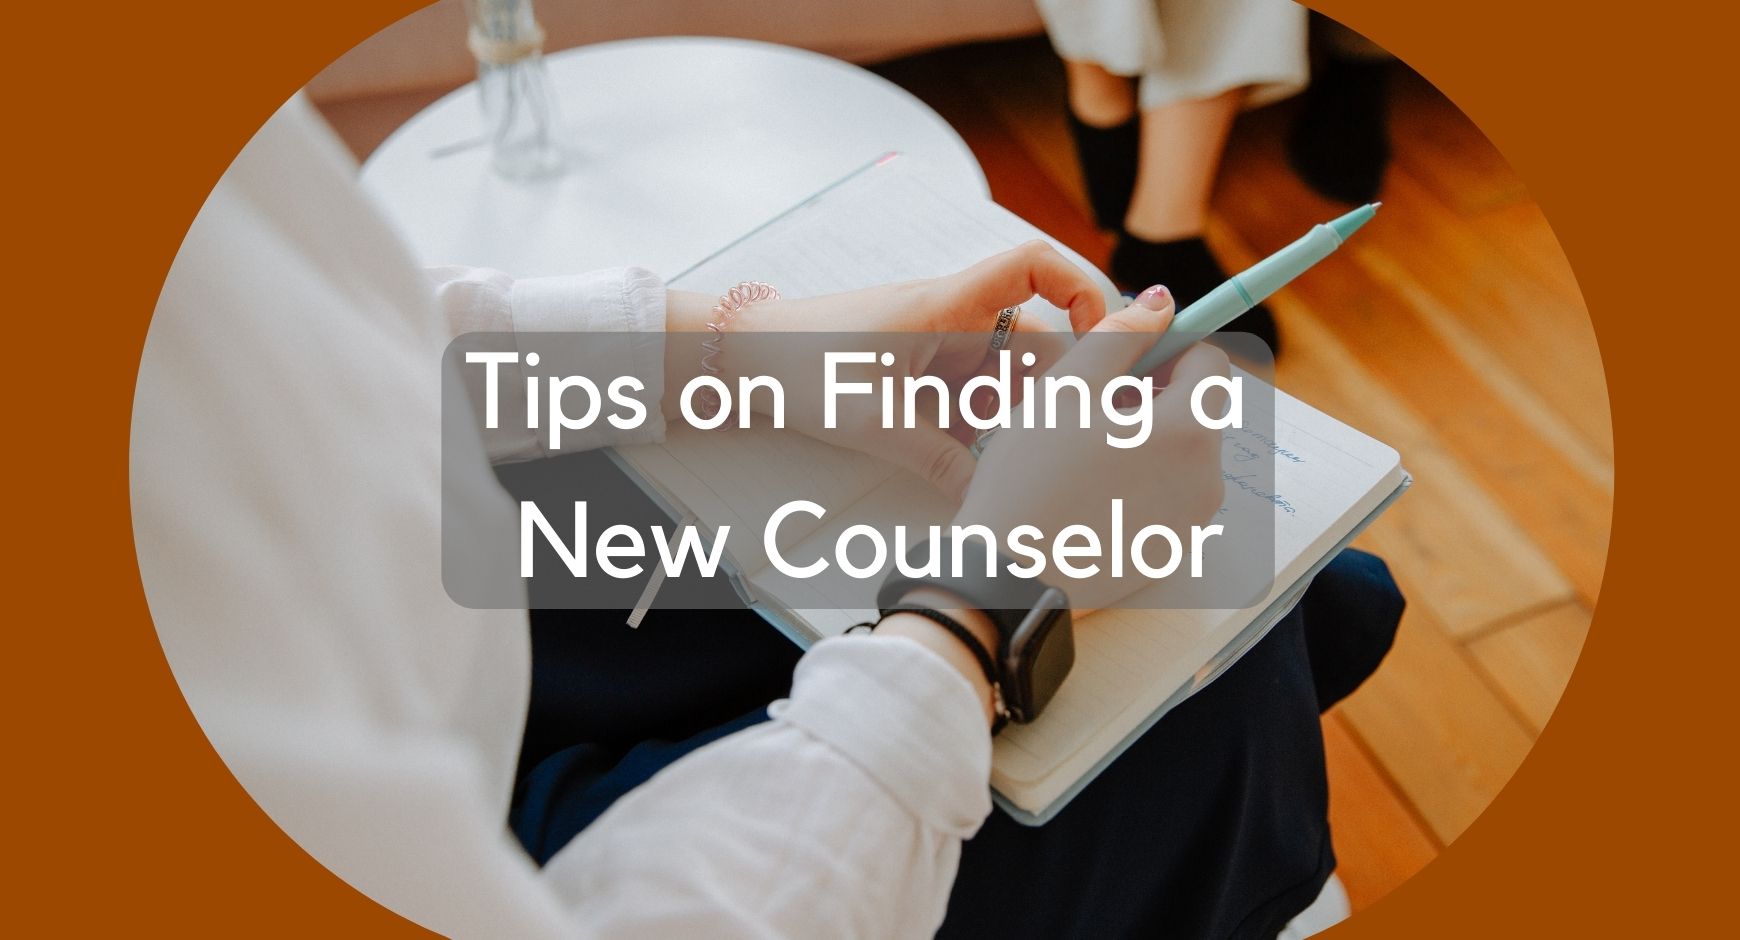 A picture of a person sitting with a notebook and pen on their lap positioned in front of two other people sitting on a couch under words that read "Tips on Finding a New Counselor".